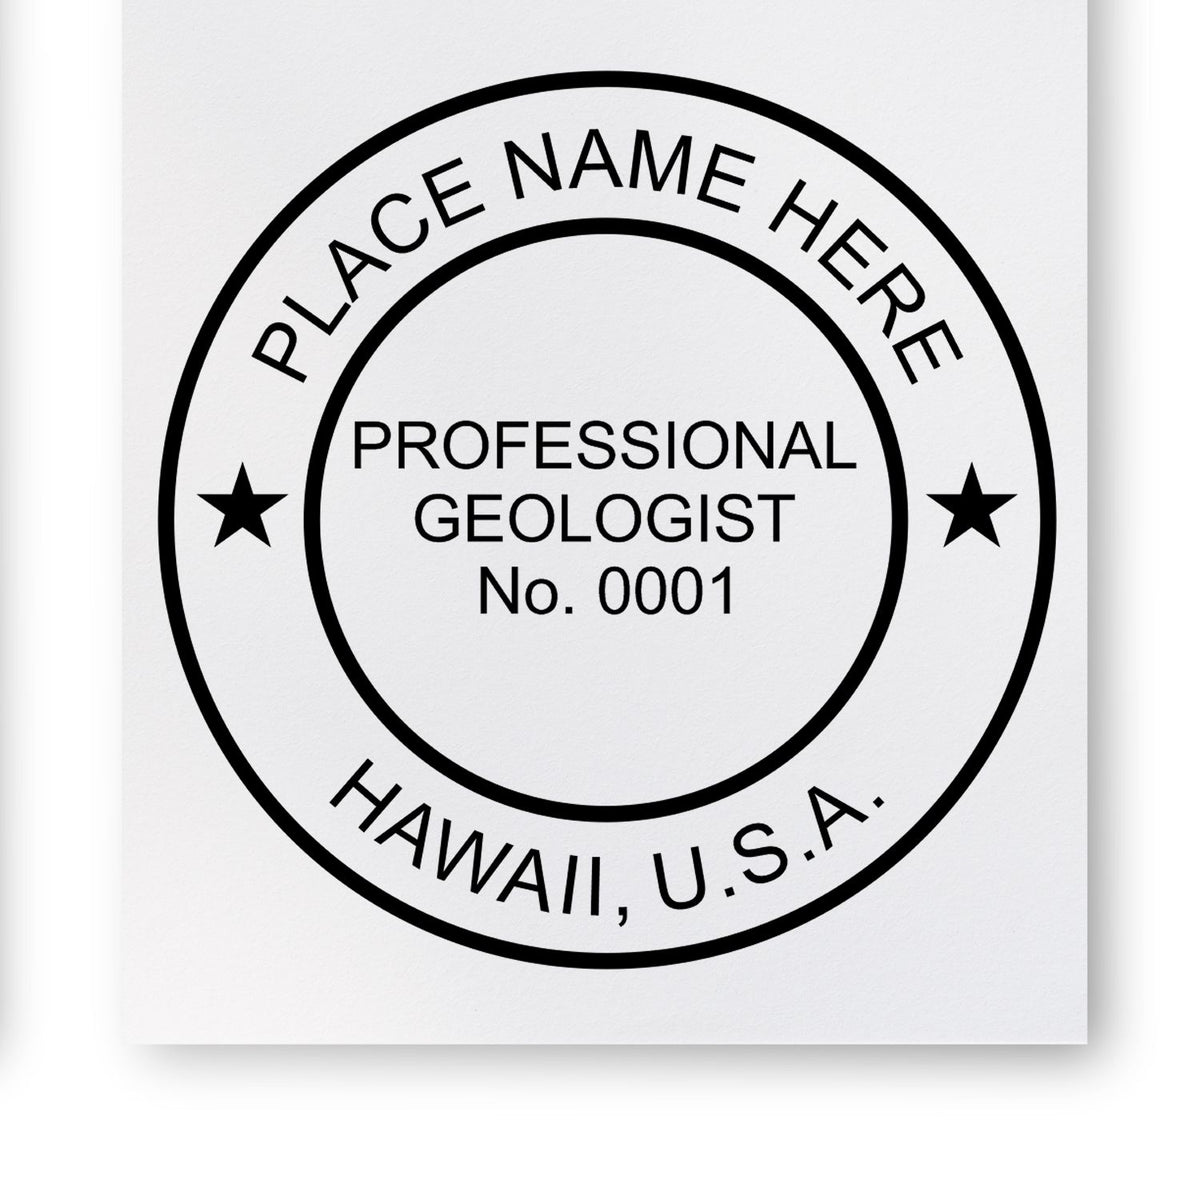 The Hawaii Professional Geologist Seal Stamp stamp impression comes to life with a crisp, detailed image stamped on paper - showcasing true professional quality.